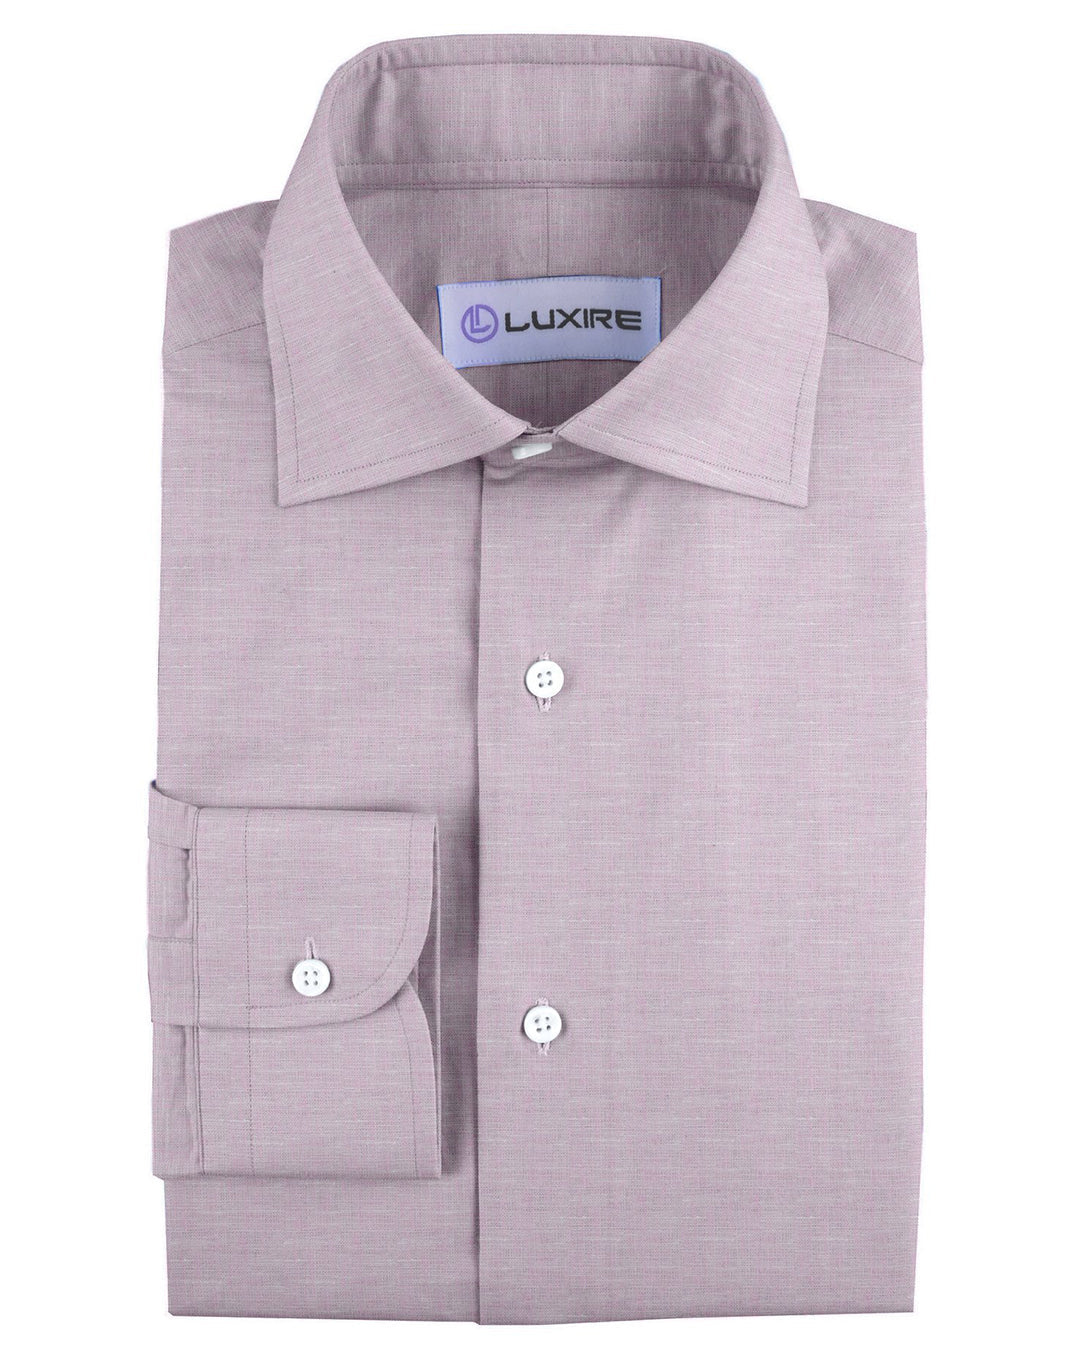 Front of the custom linen shirt for men in pale pink by Luxire Clothing